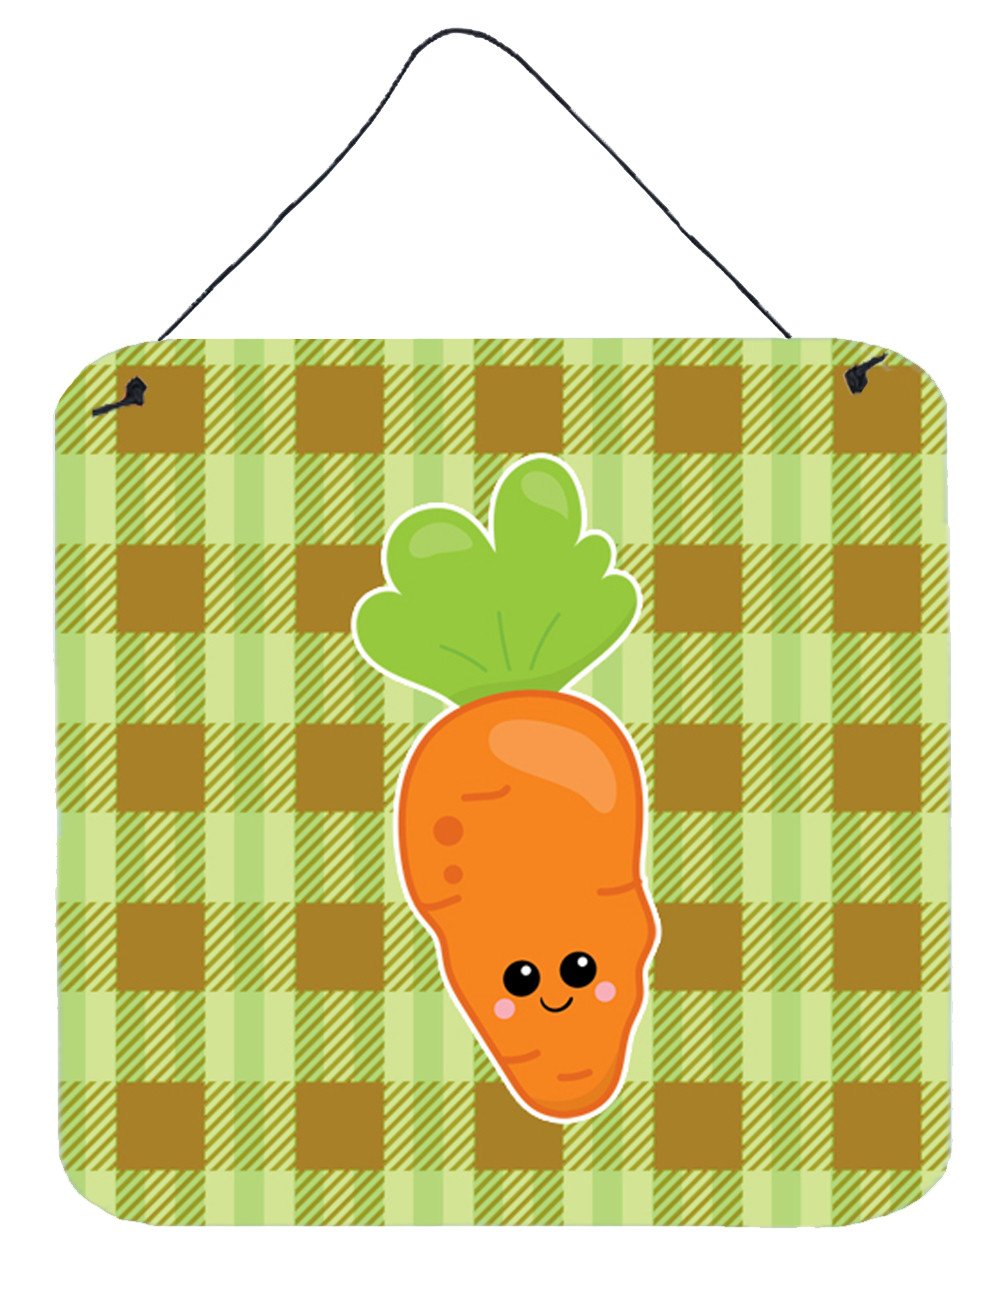 Carol the Carrot Wall or Door Hanging Prints BB6891DS66 by Caroline's Treasures